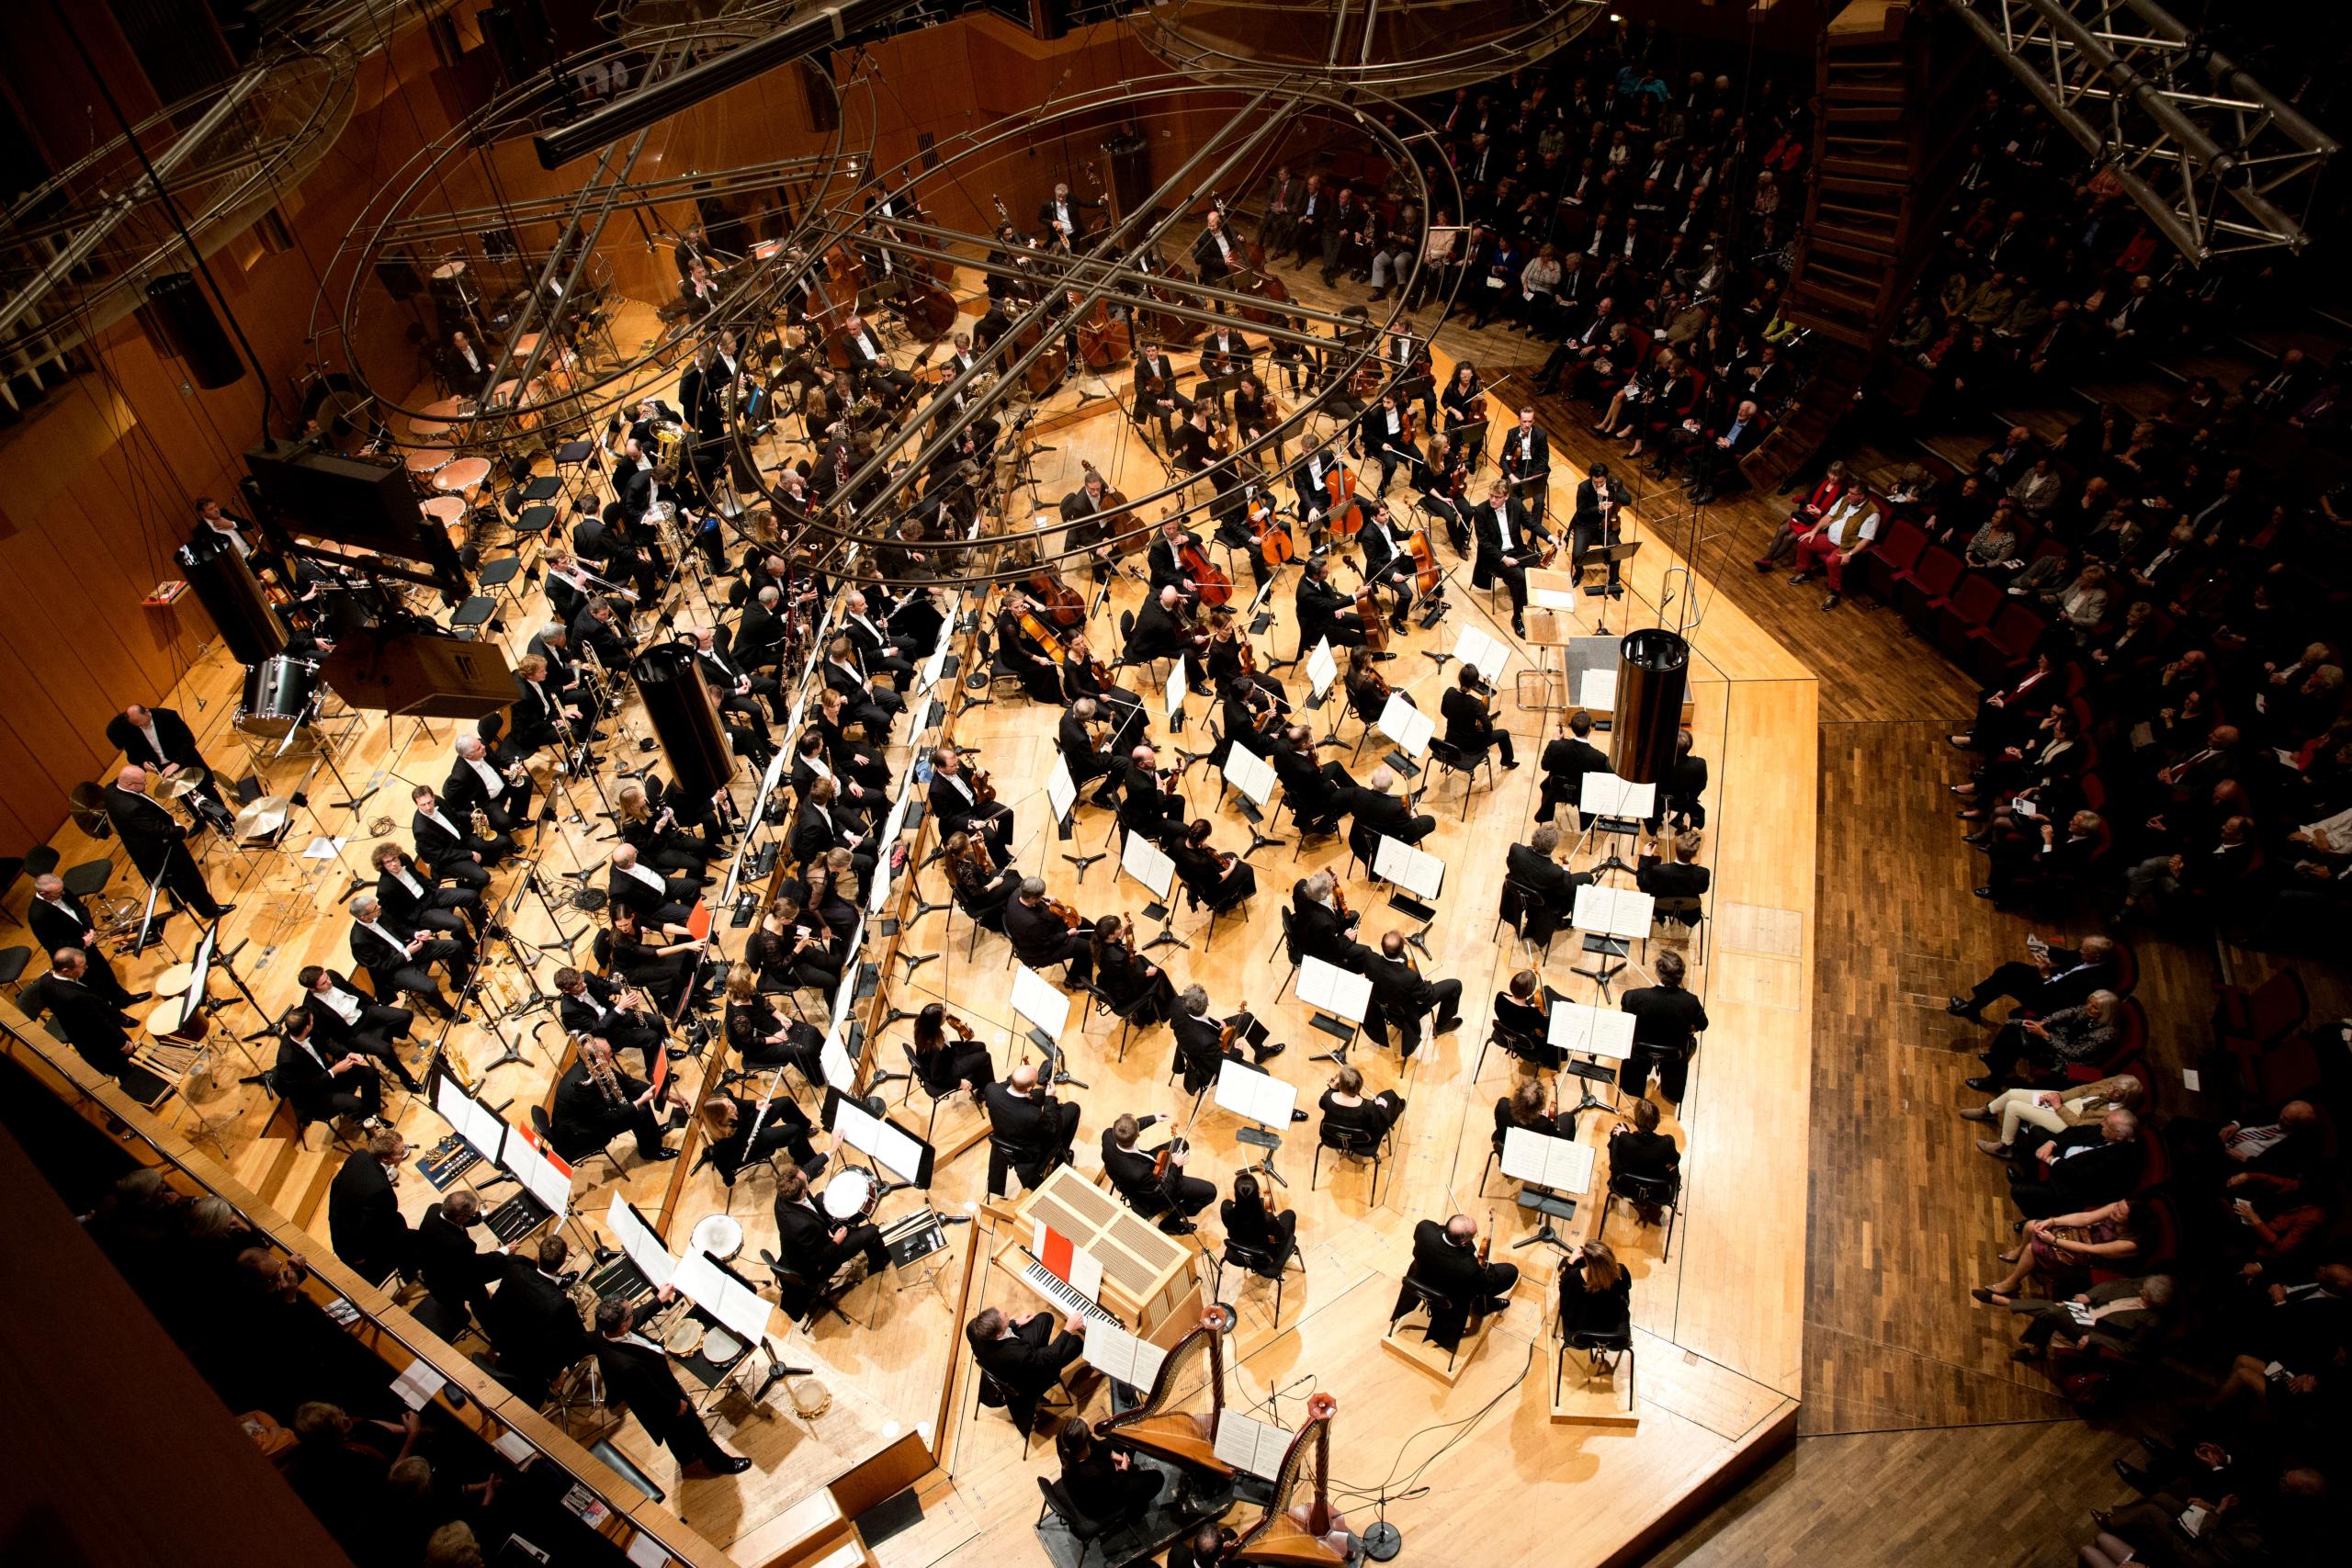 The Bavarian Radio Symphony Orchestra on stage in the Gasteig photographed from above.